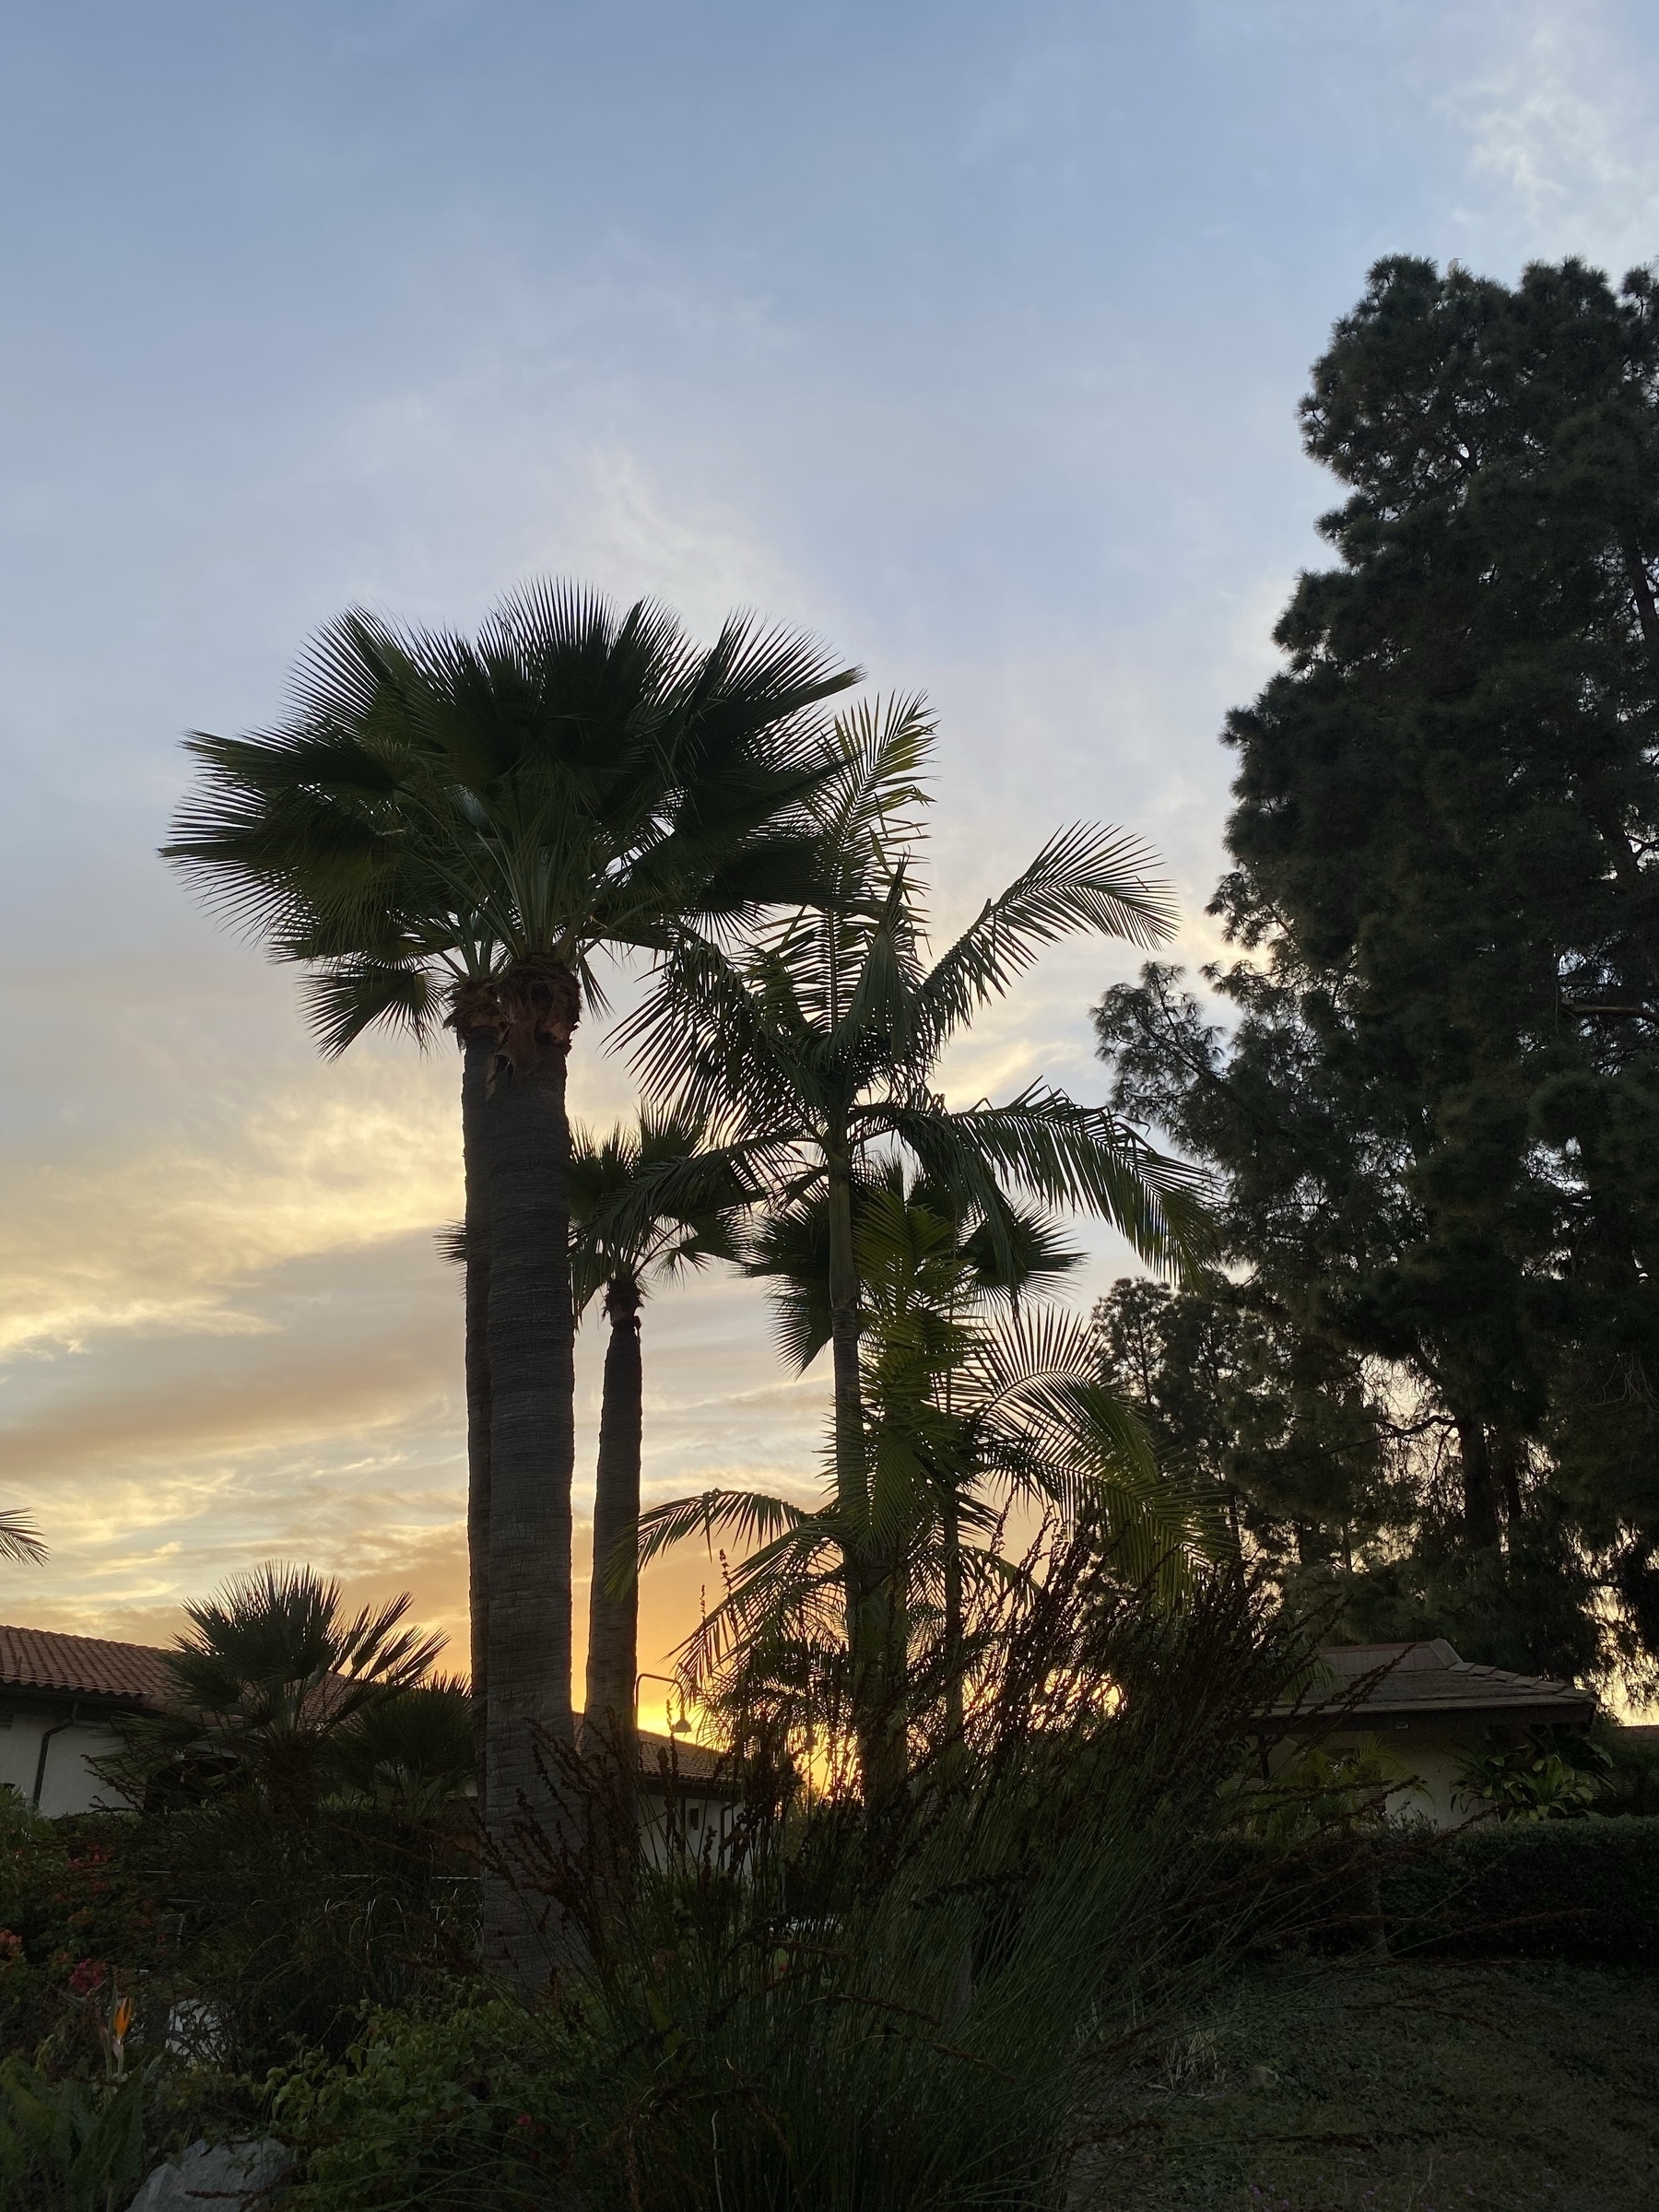 Dark silhouettes of  trees, including palm trees, against a pale blue and yellow sunset.